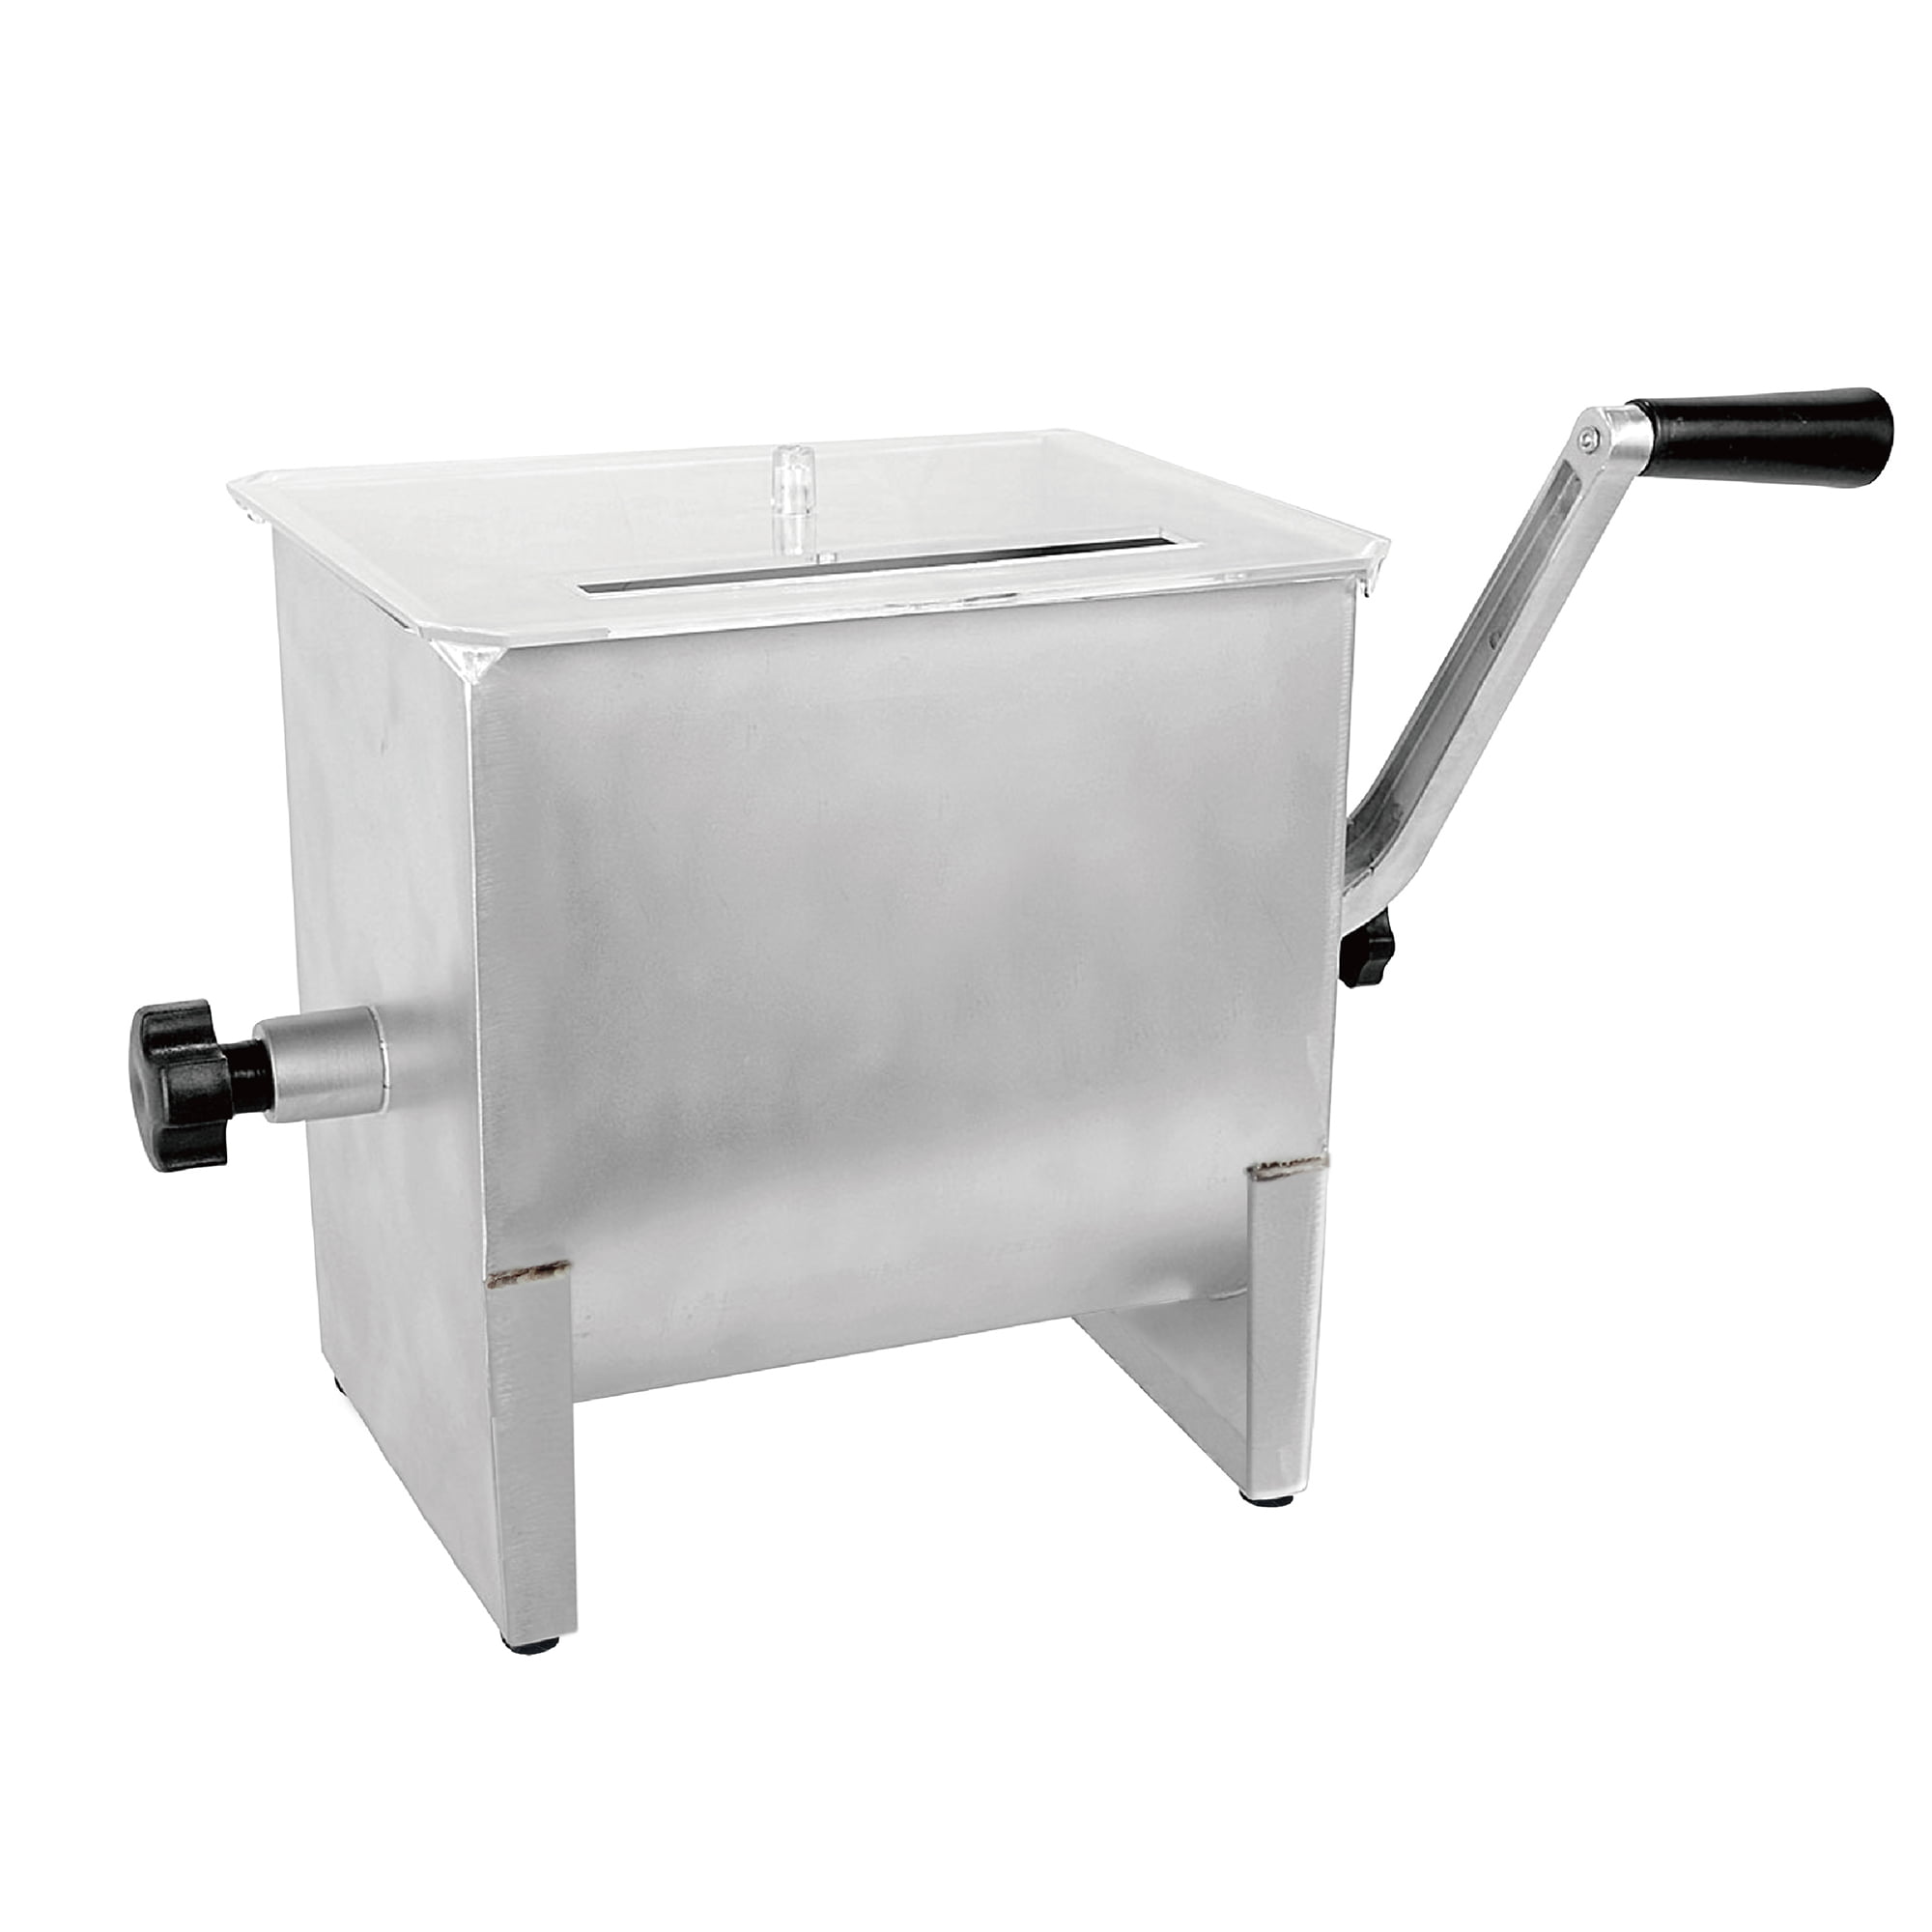 DELLA Stainless Steel Manual Meat Mixer Prep Kitchen Appliance 4.2 Gallon 17 Lb Capacity 